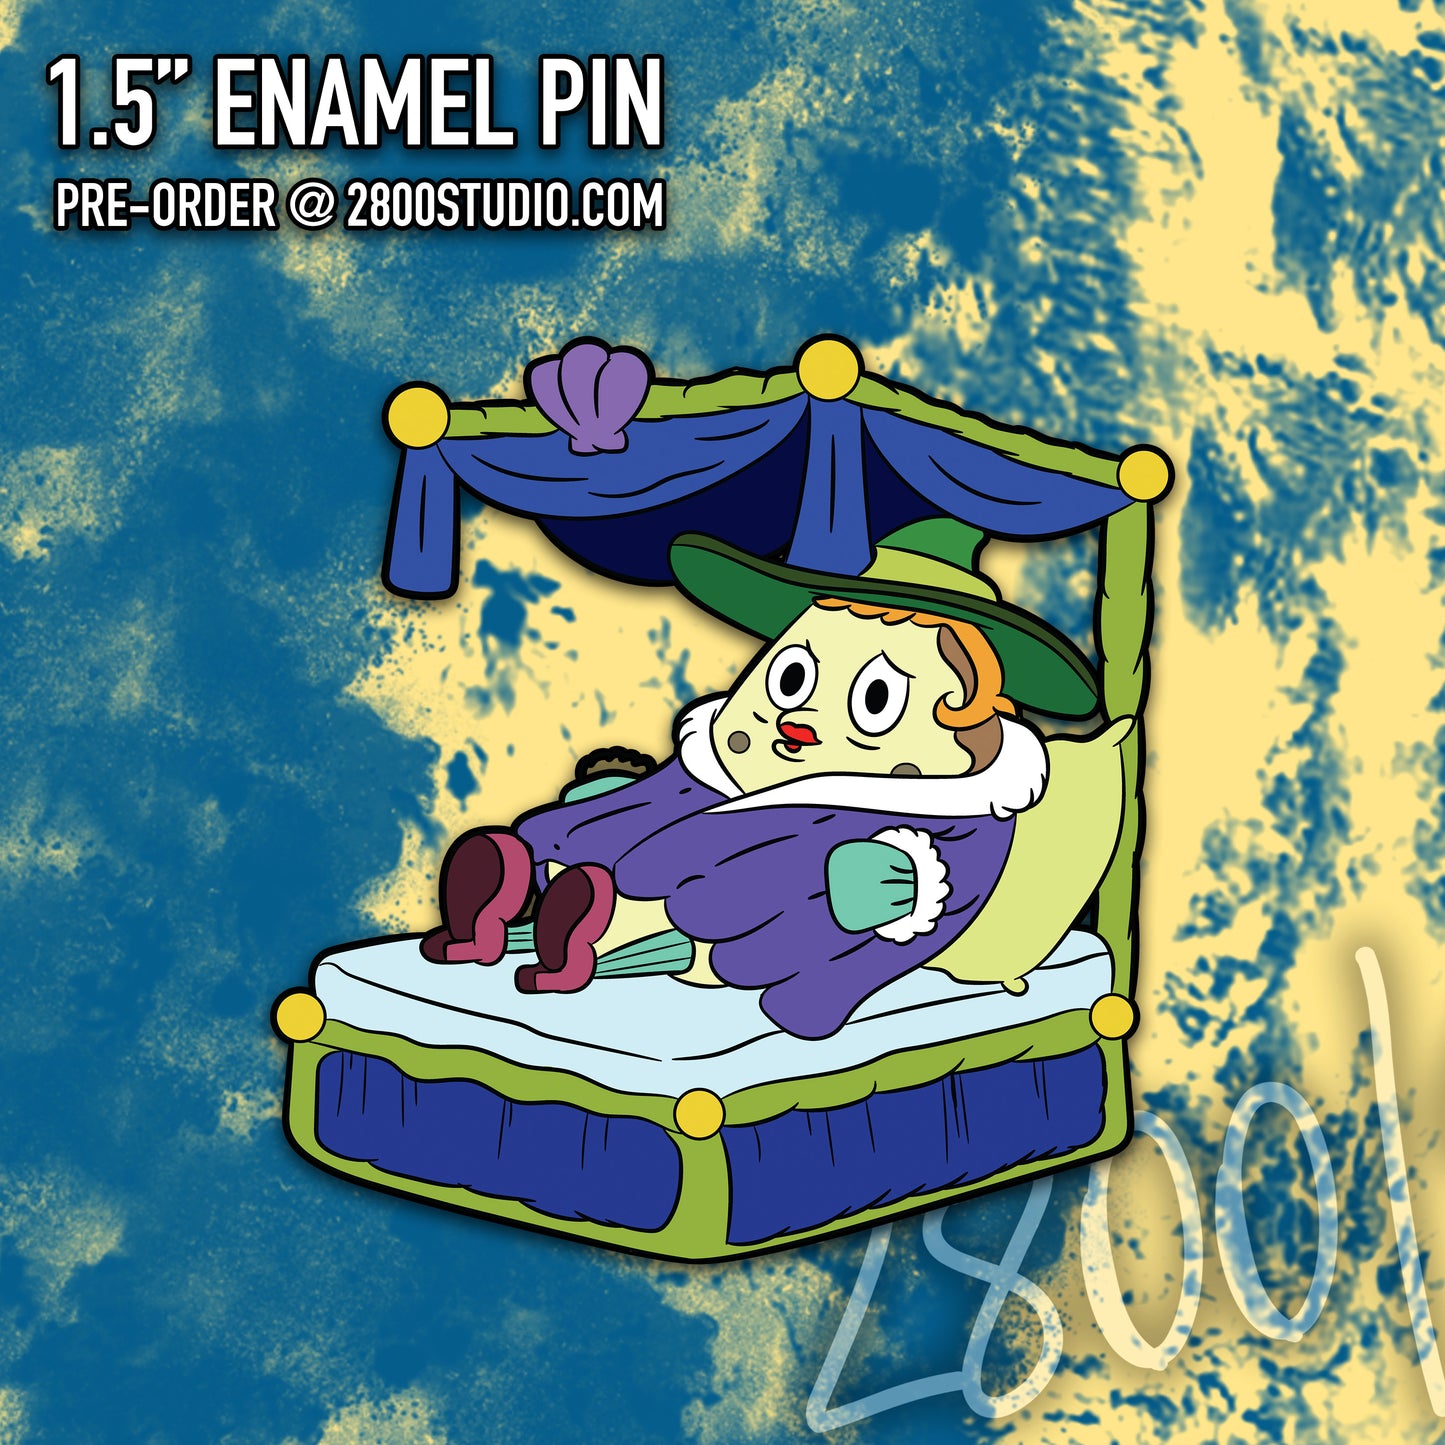 Are we going to the park soon? 1.5" Enamel Pin